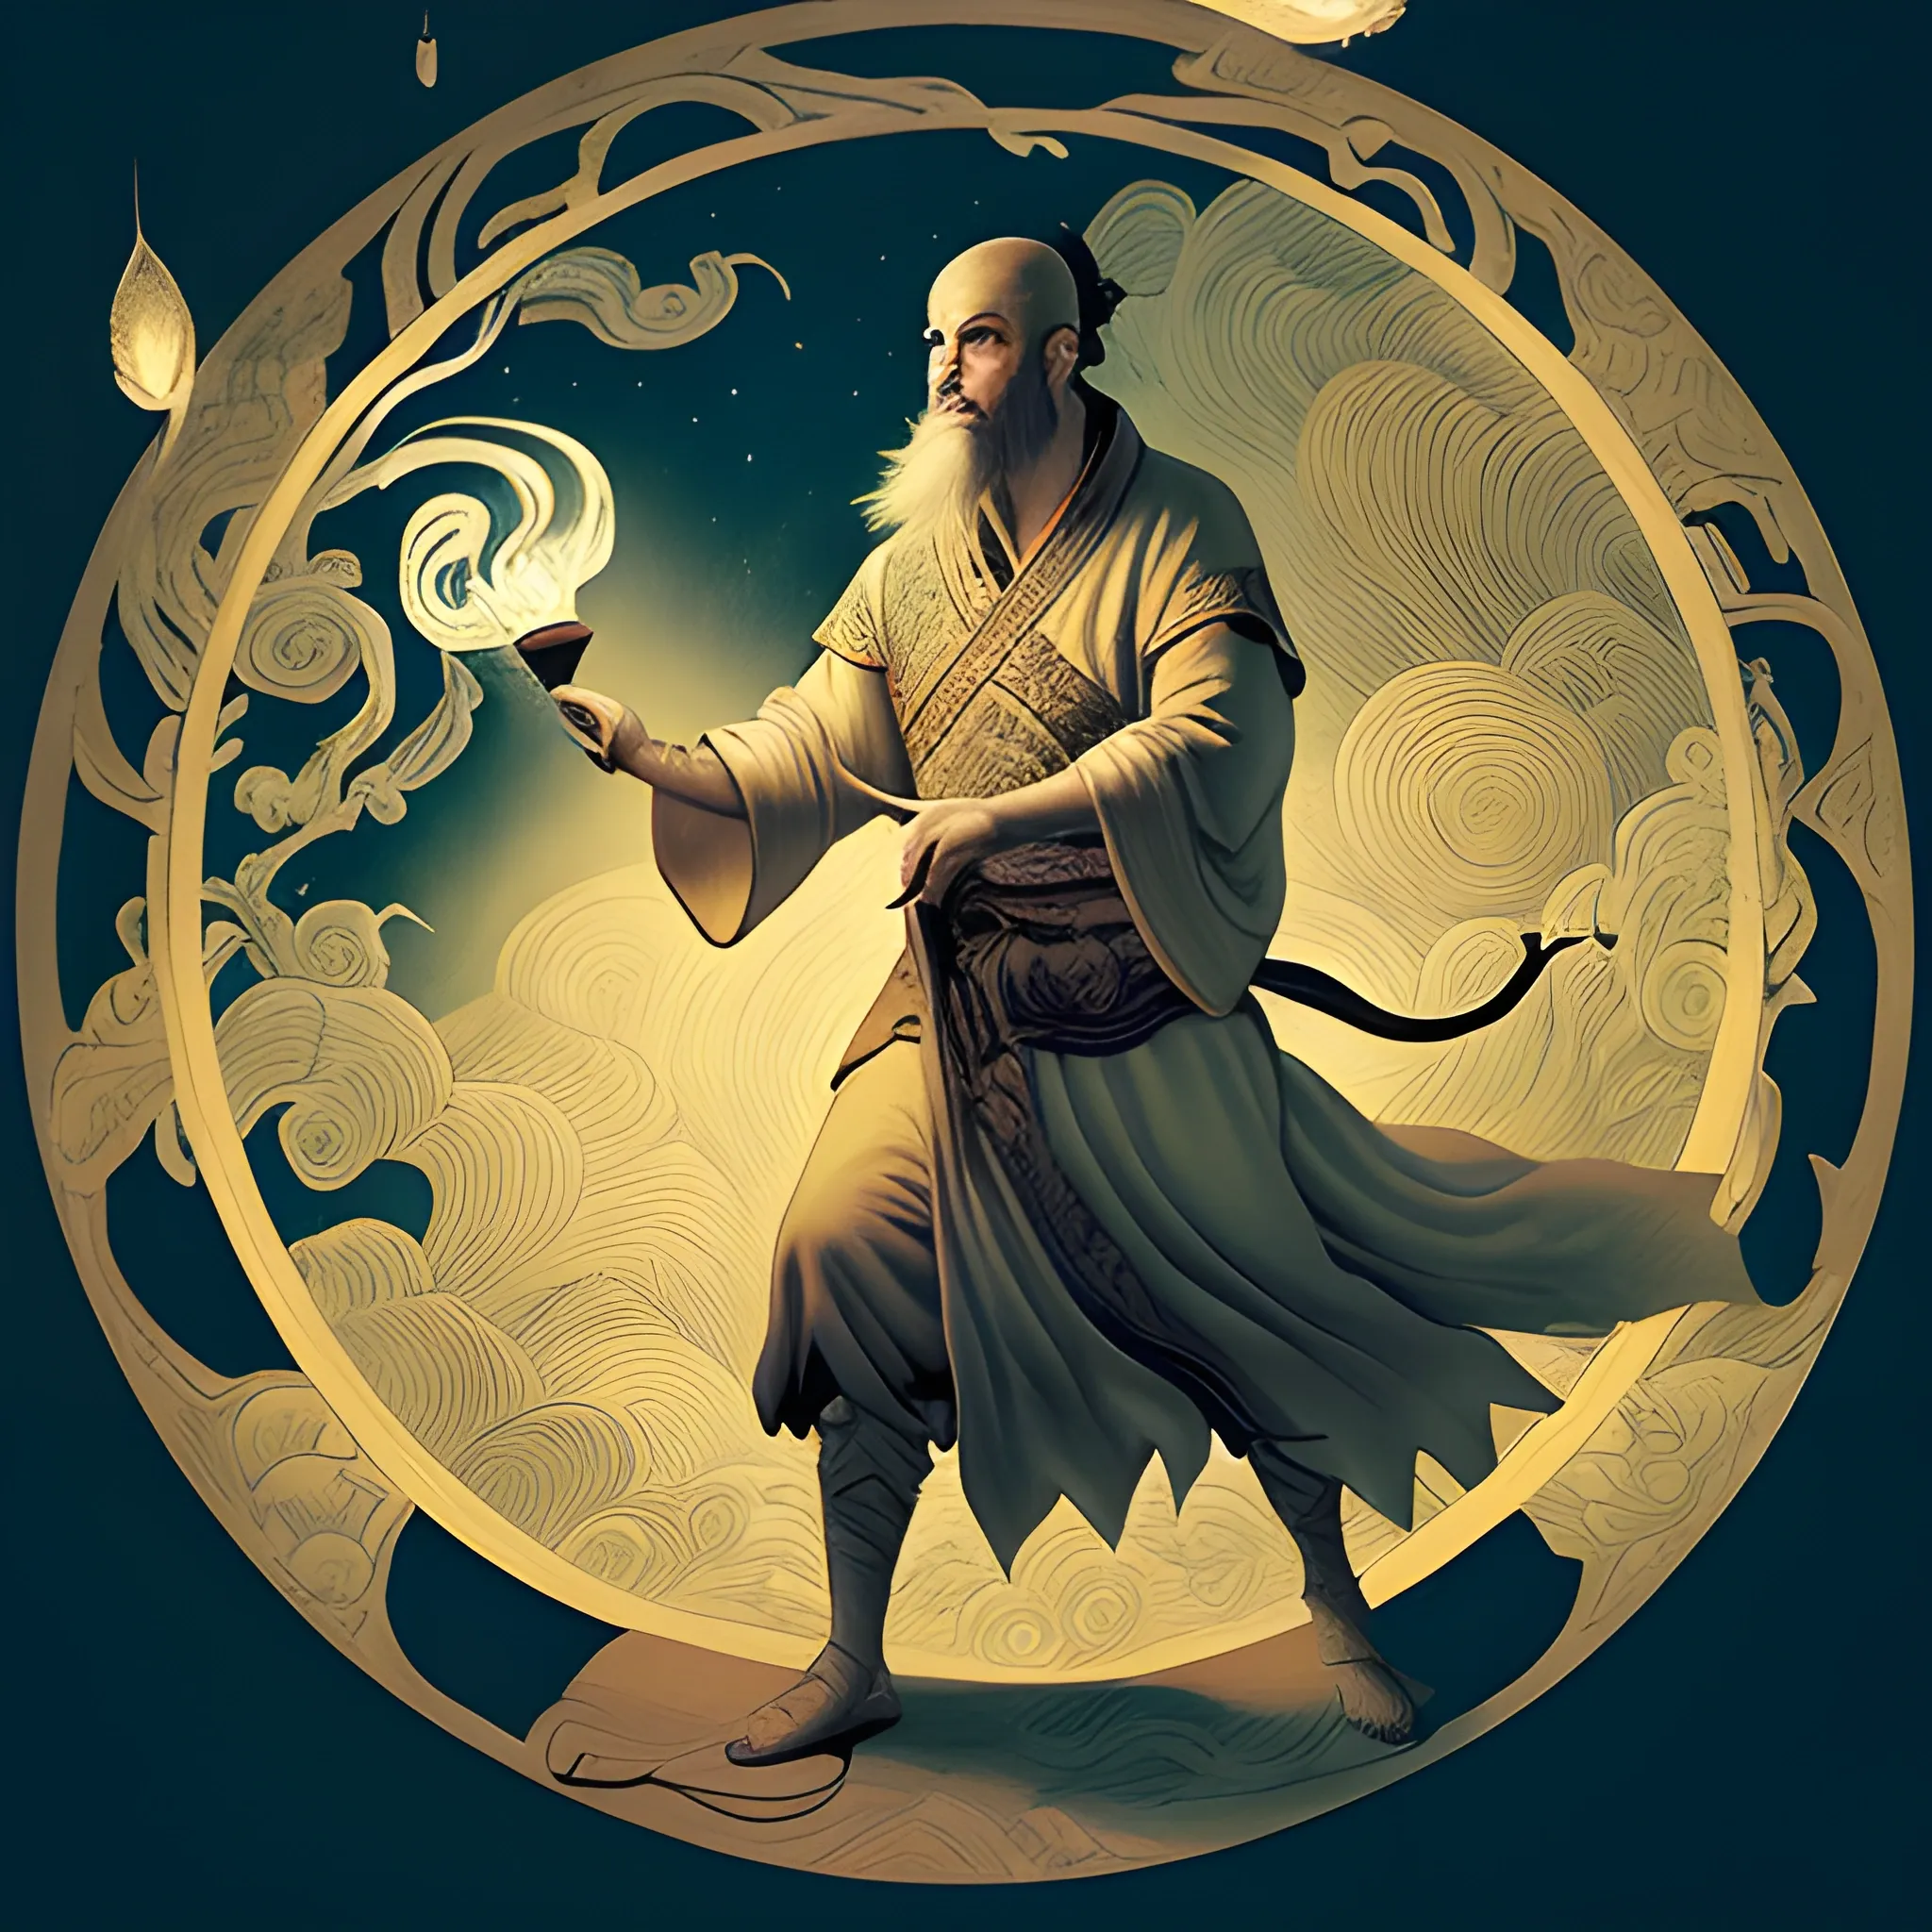 A man holds a lamp in the style of an epic fantasy scene, chinoiserie, ethereal illustration, swirls, to bring light to the world when night falls